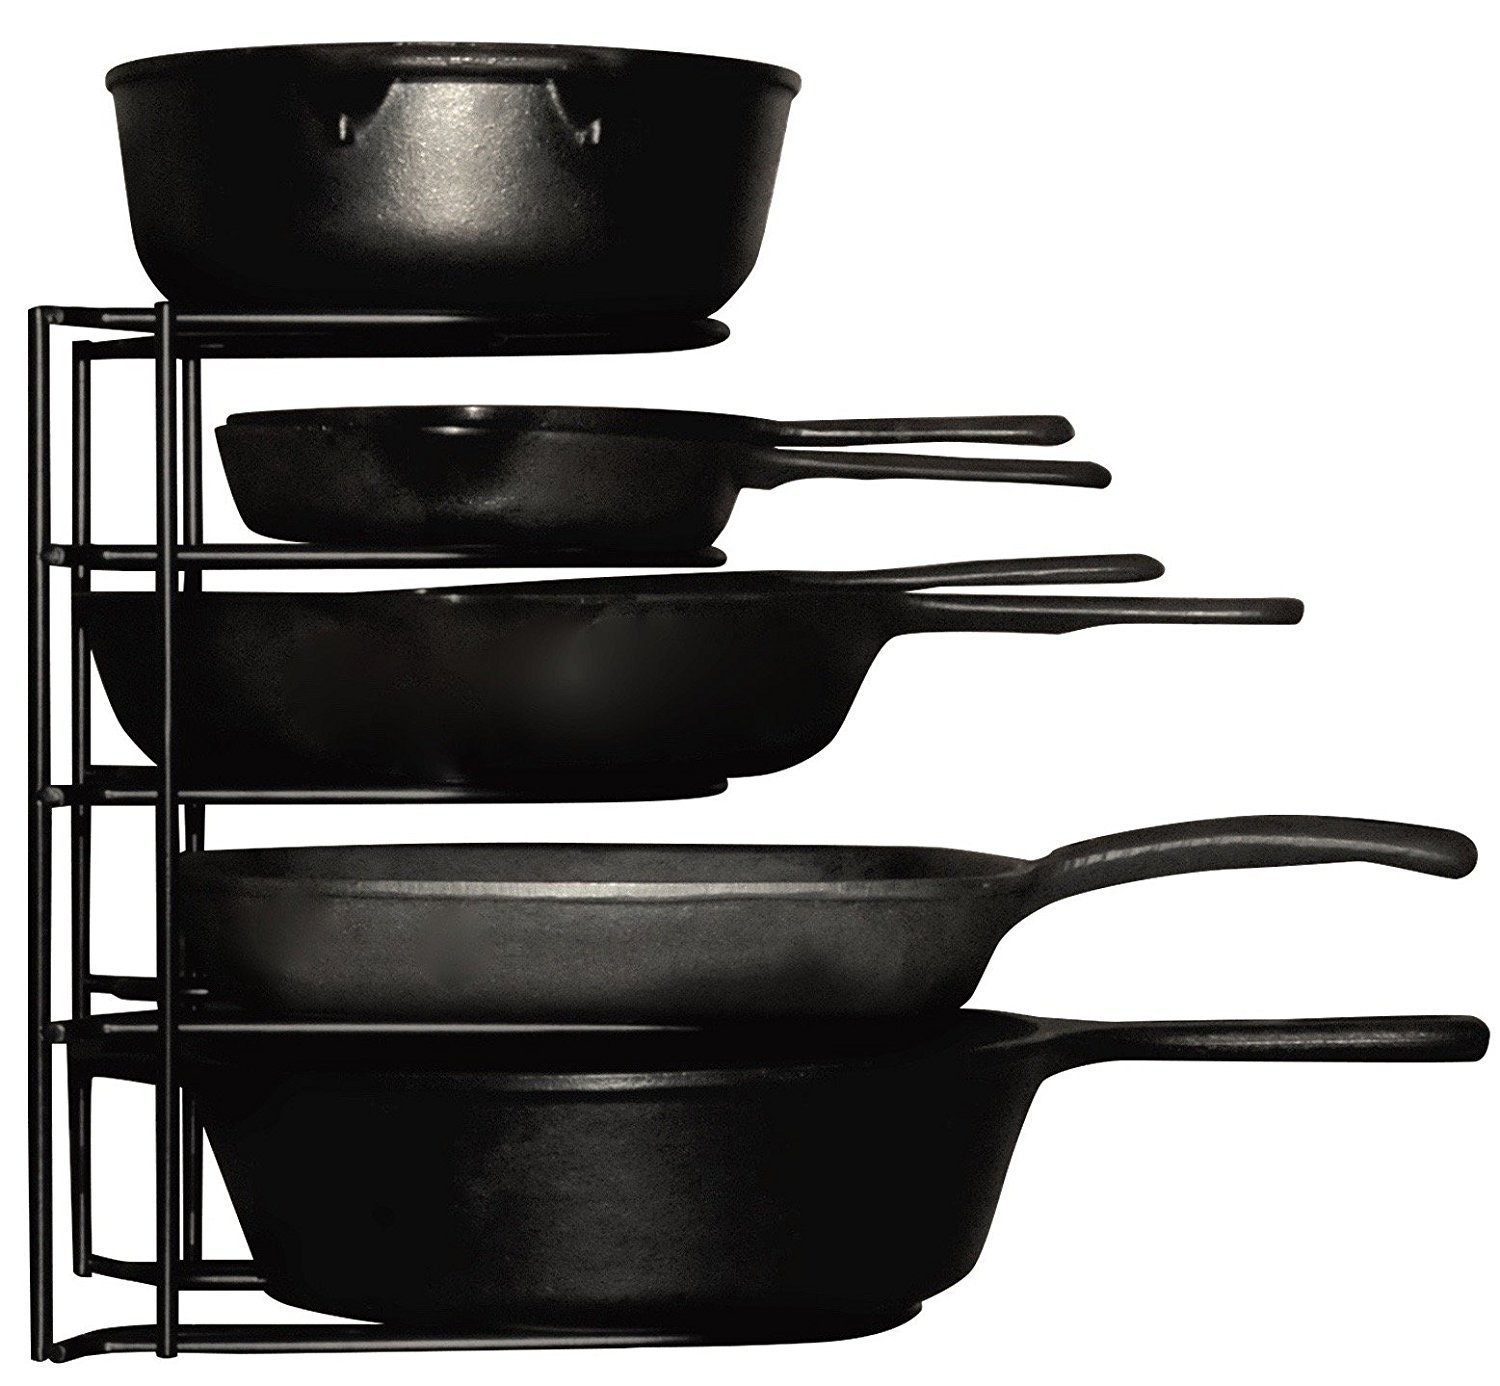 Convenient Storage and Organization 7-Slot Holder Multipurpose Pans Heavy-Duty Stainless-Steel Craftsmanship Cast Iron Skillets Berry Ave Kitchen Lid Rack for Pots 